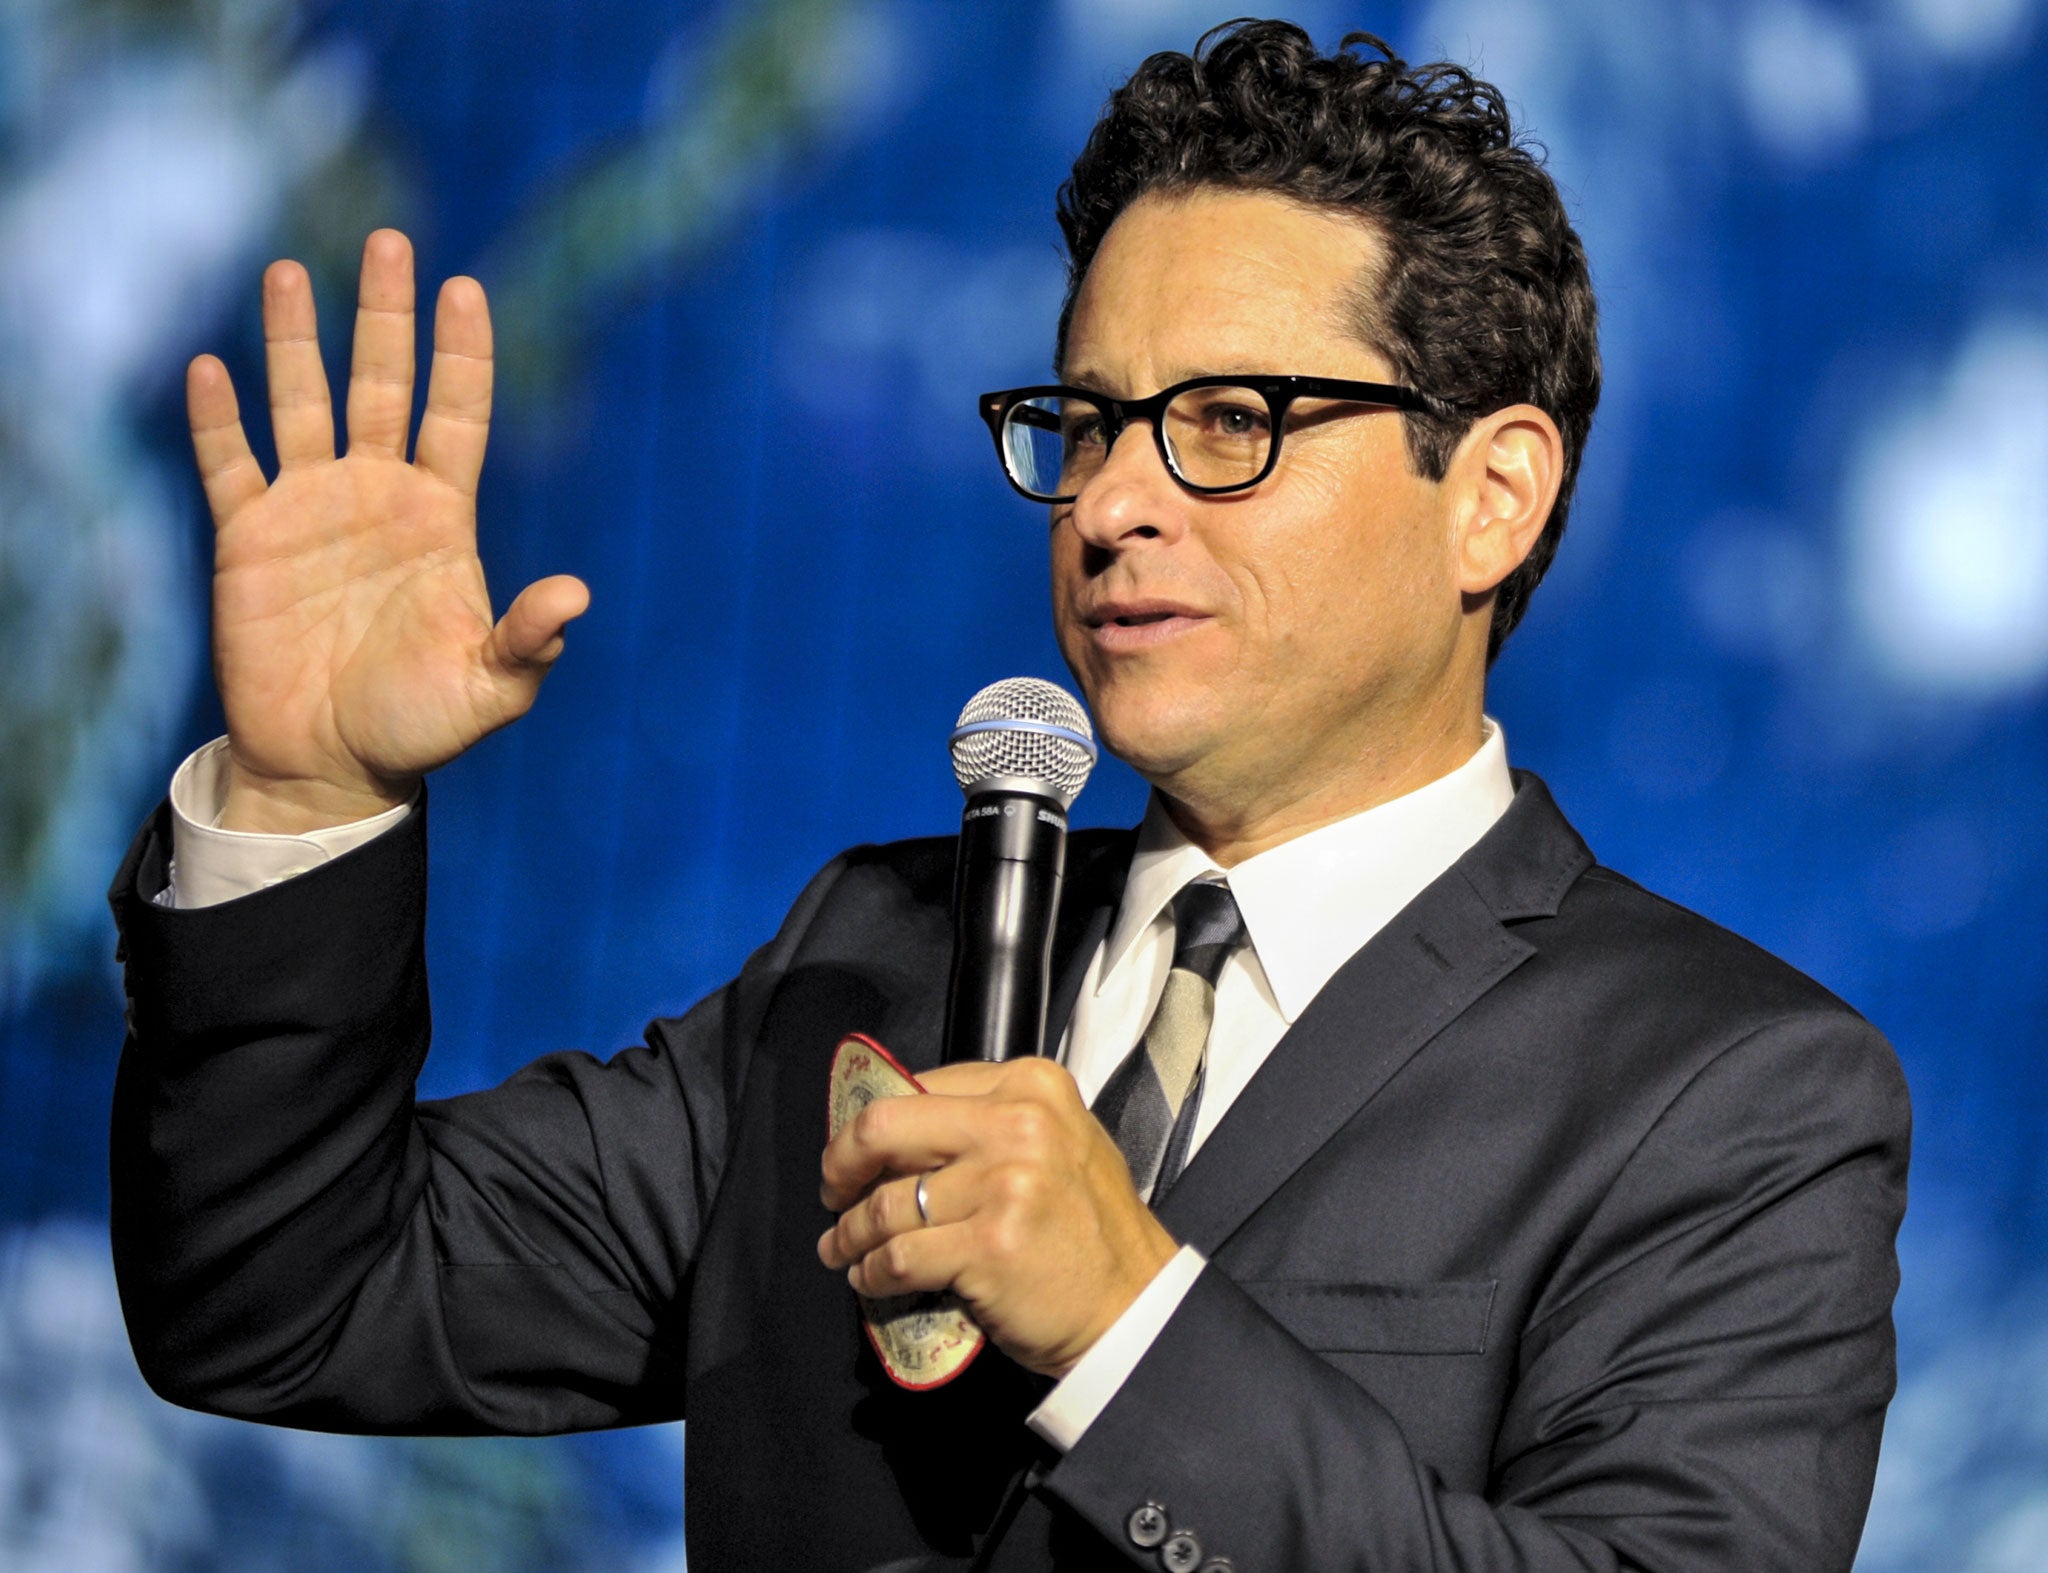 J.J. Abrams did not say whether he would helm Star Wars 8